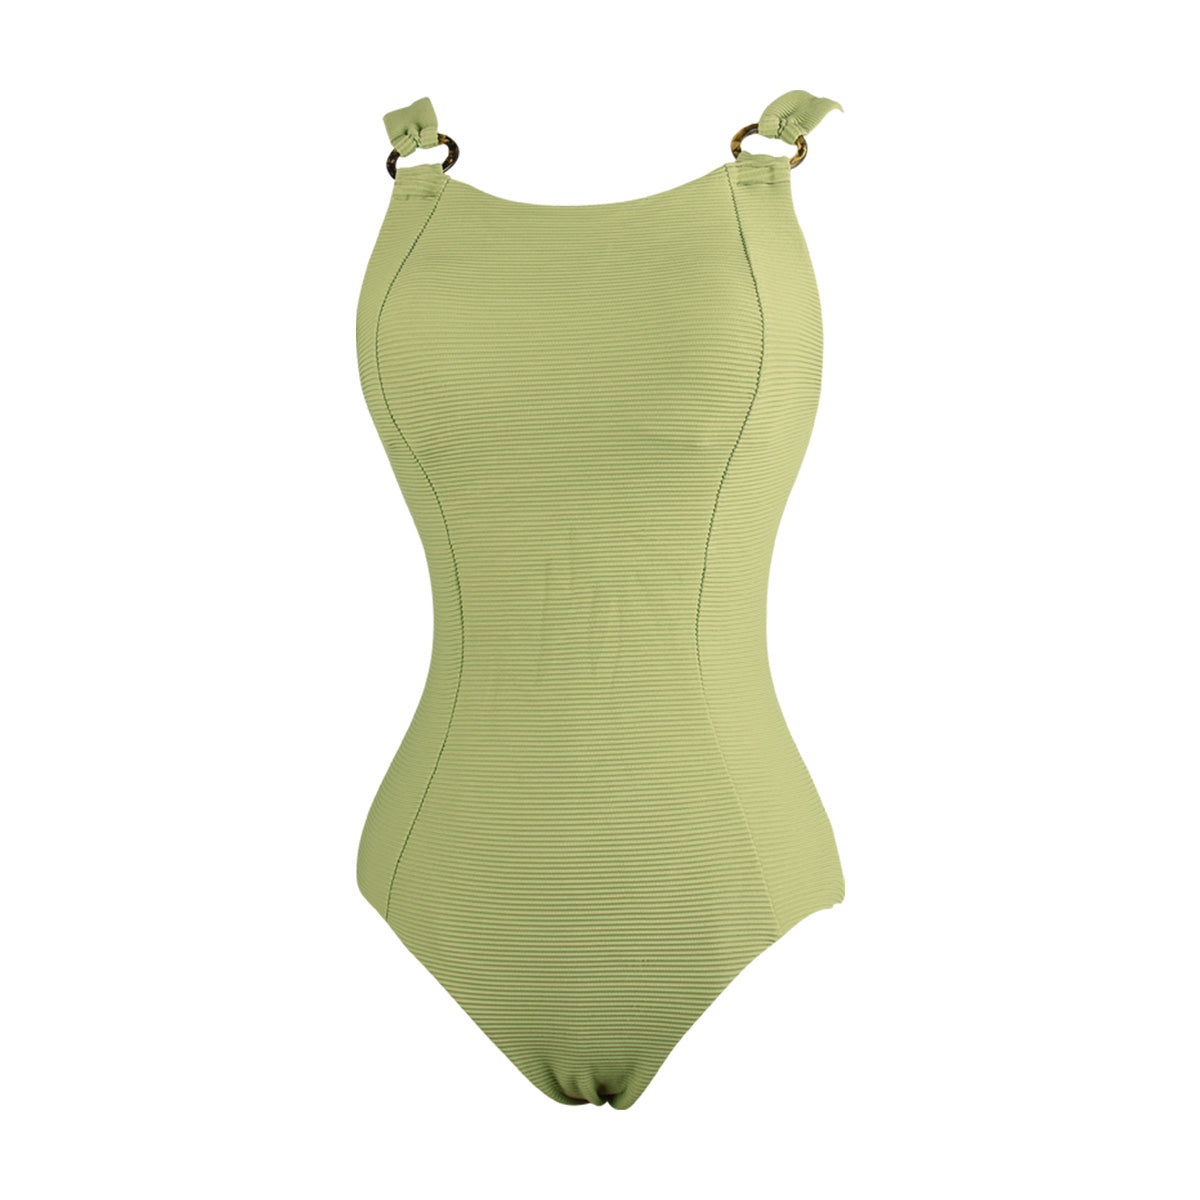 classic-one-piece-cheeky-butt-bikini-with-ring-connectors_all_green_4.jpg